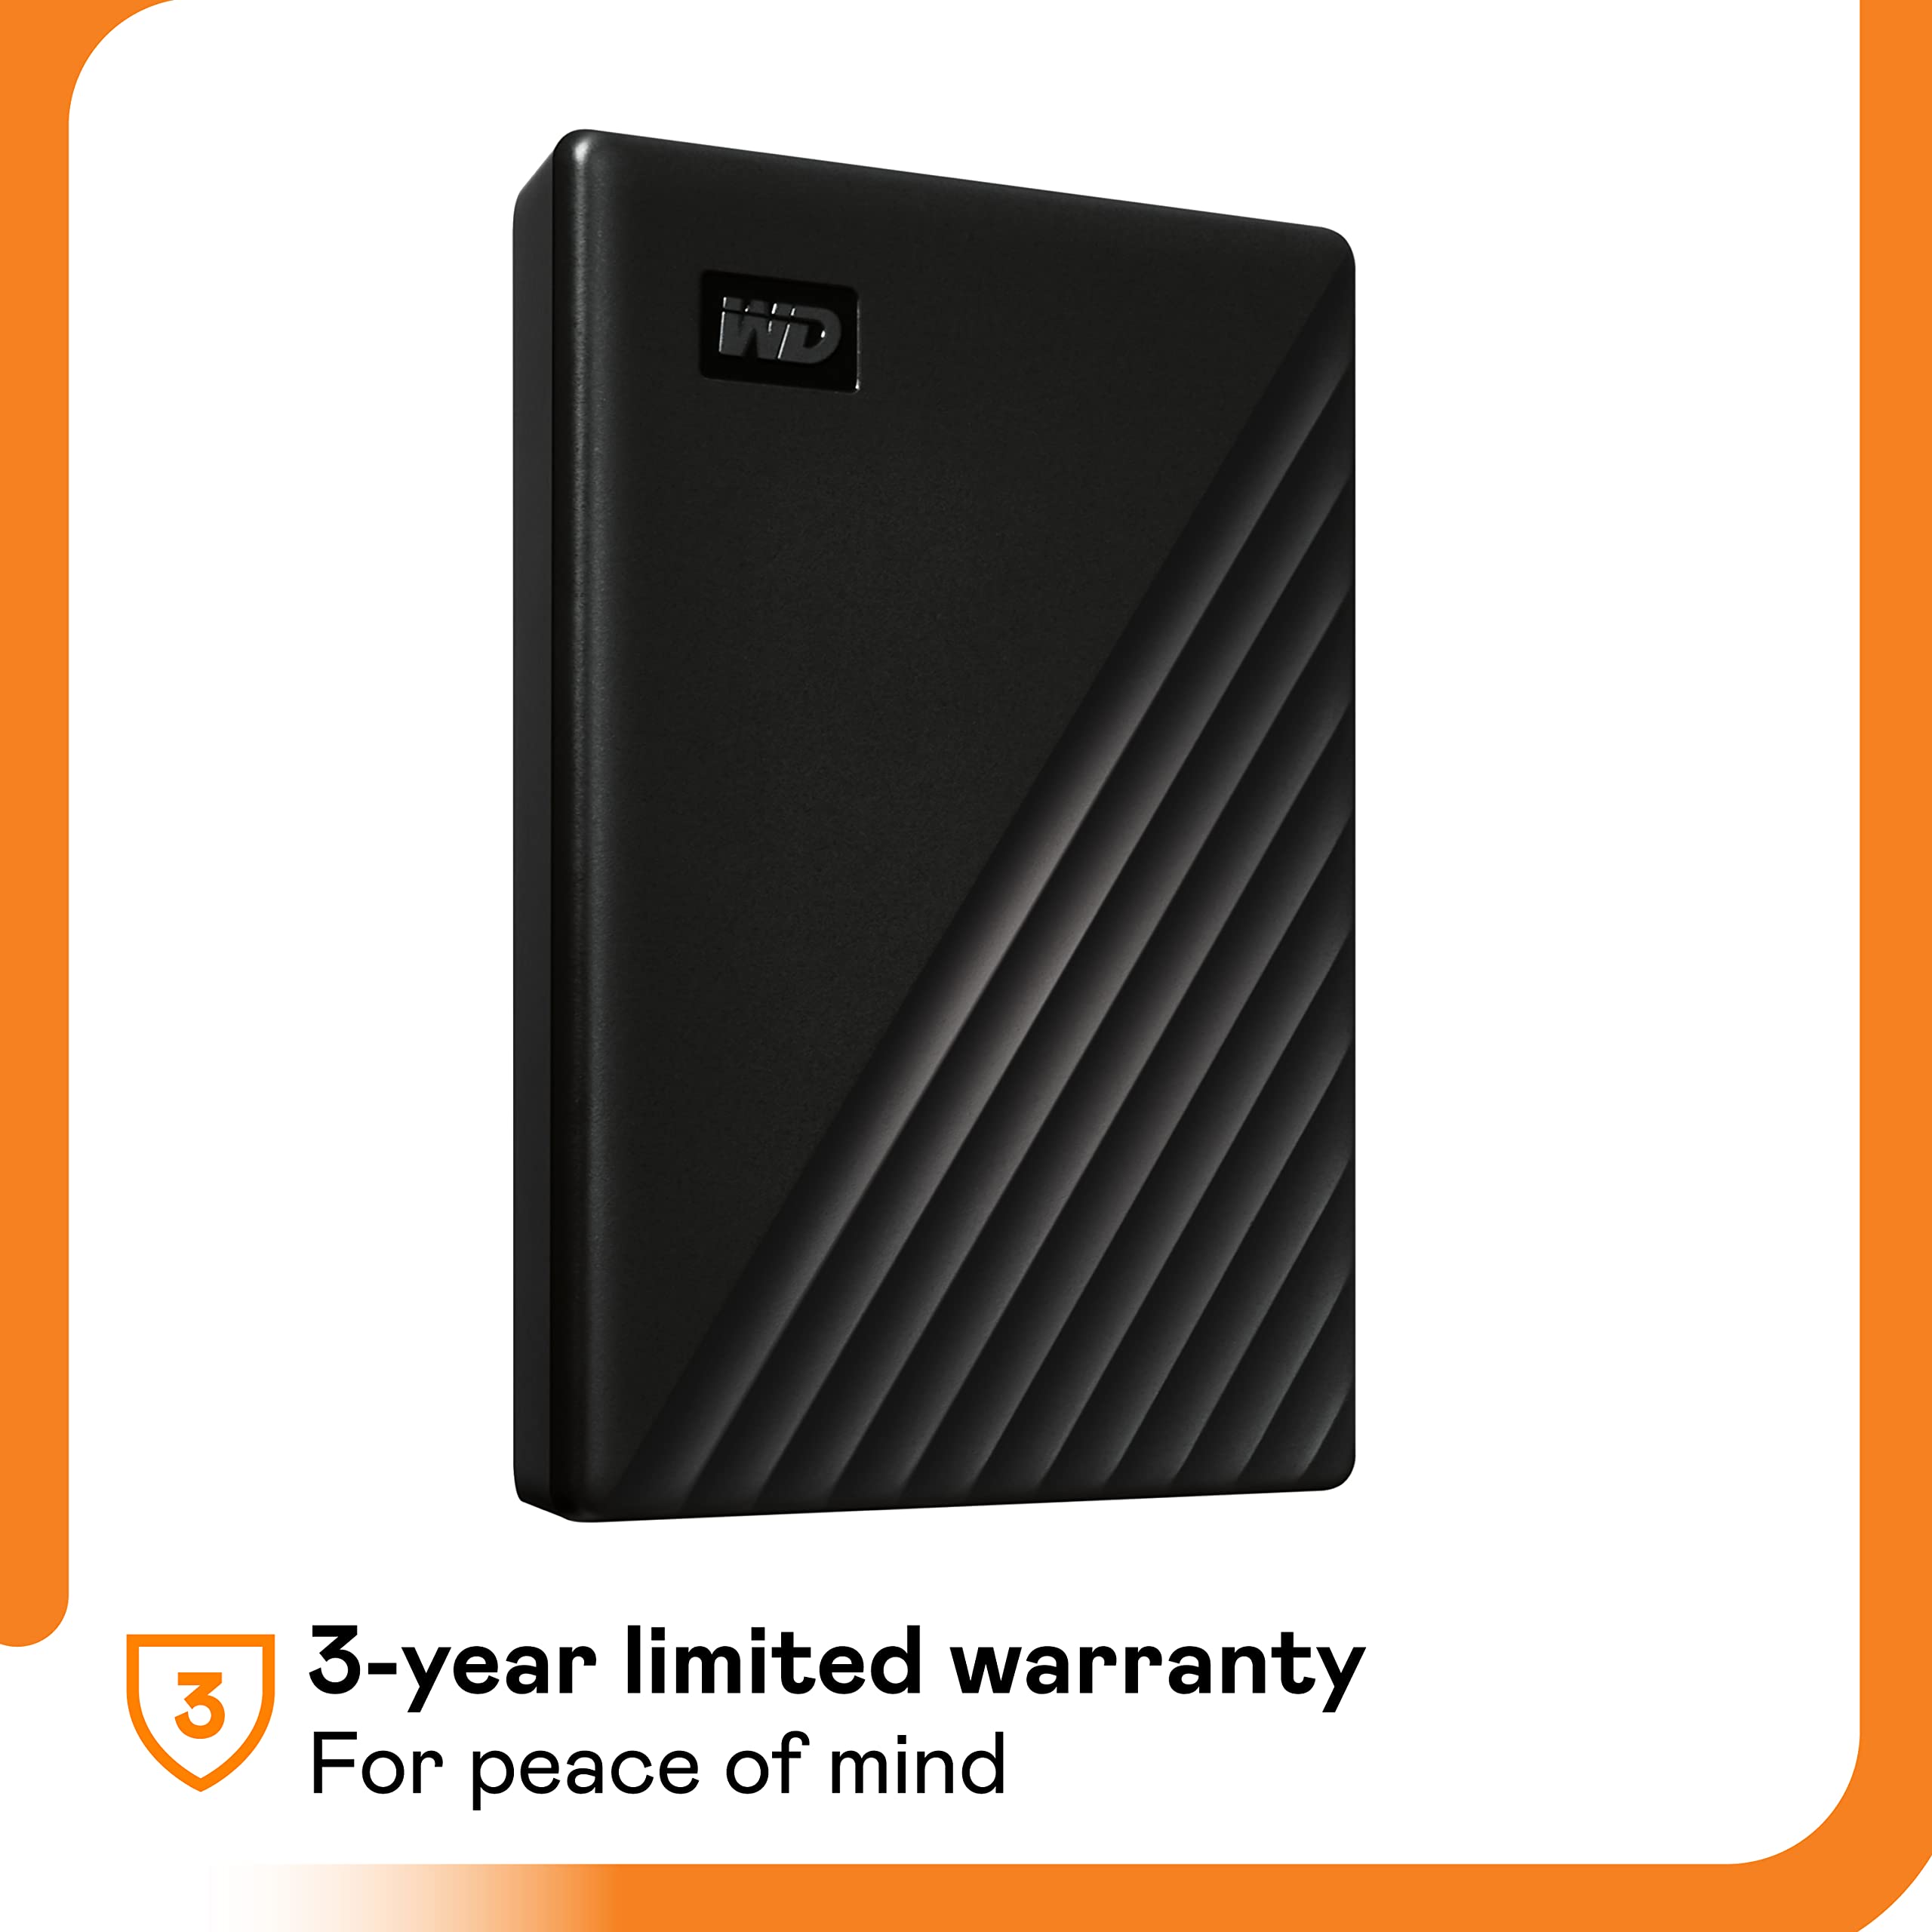 WD 1TB My Passport Portable External Hard Drive with backup software and password protection, Black - WDBYVG0010BBK-WESN